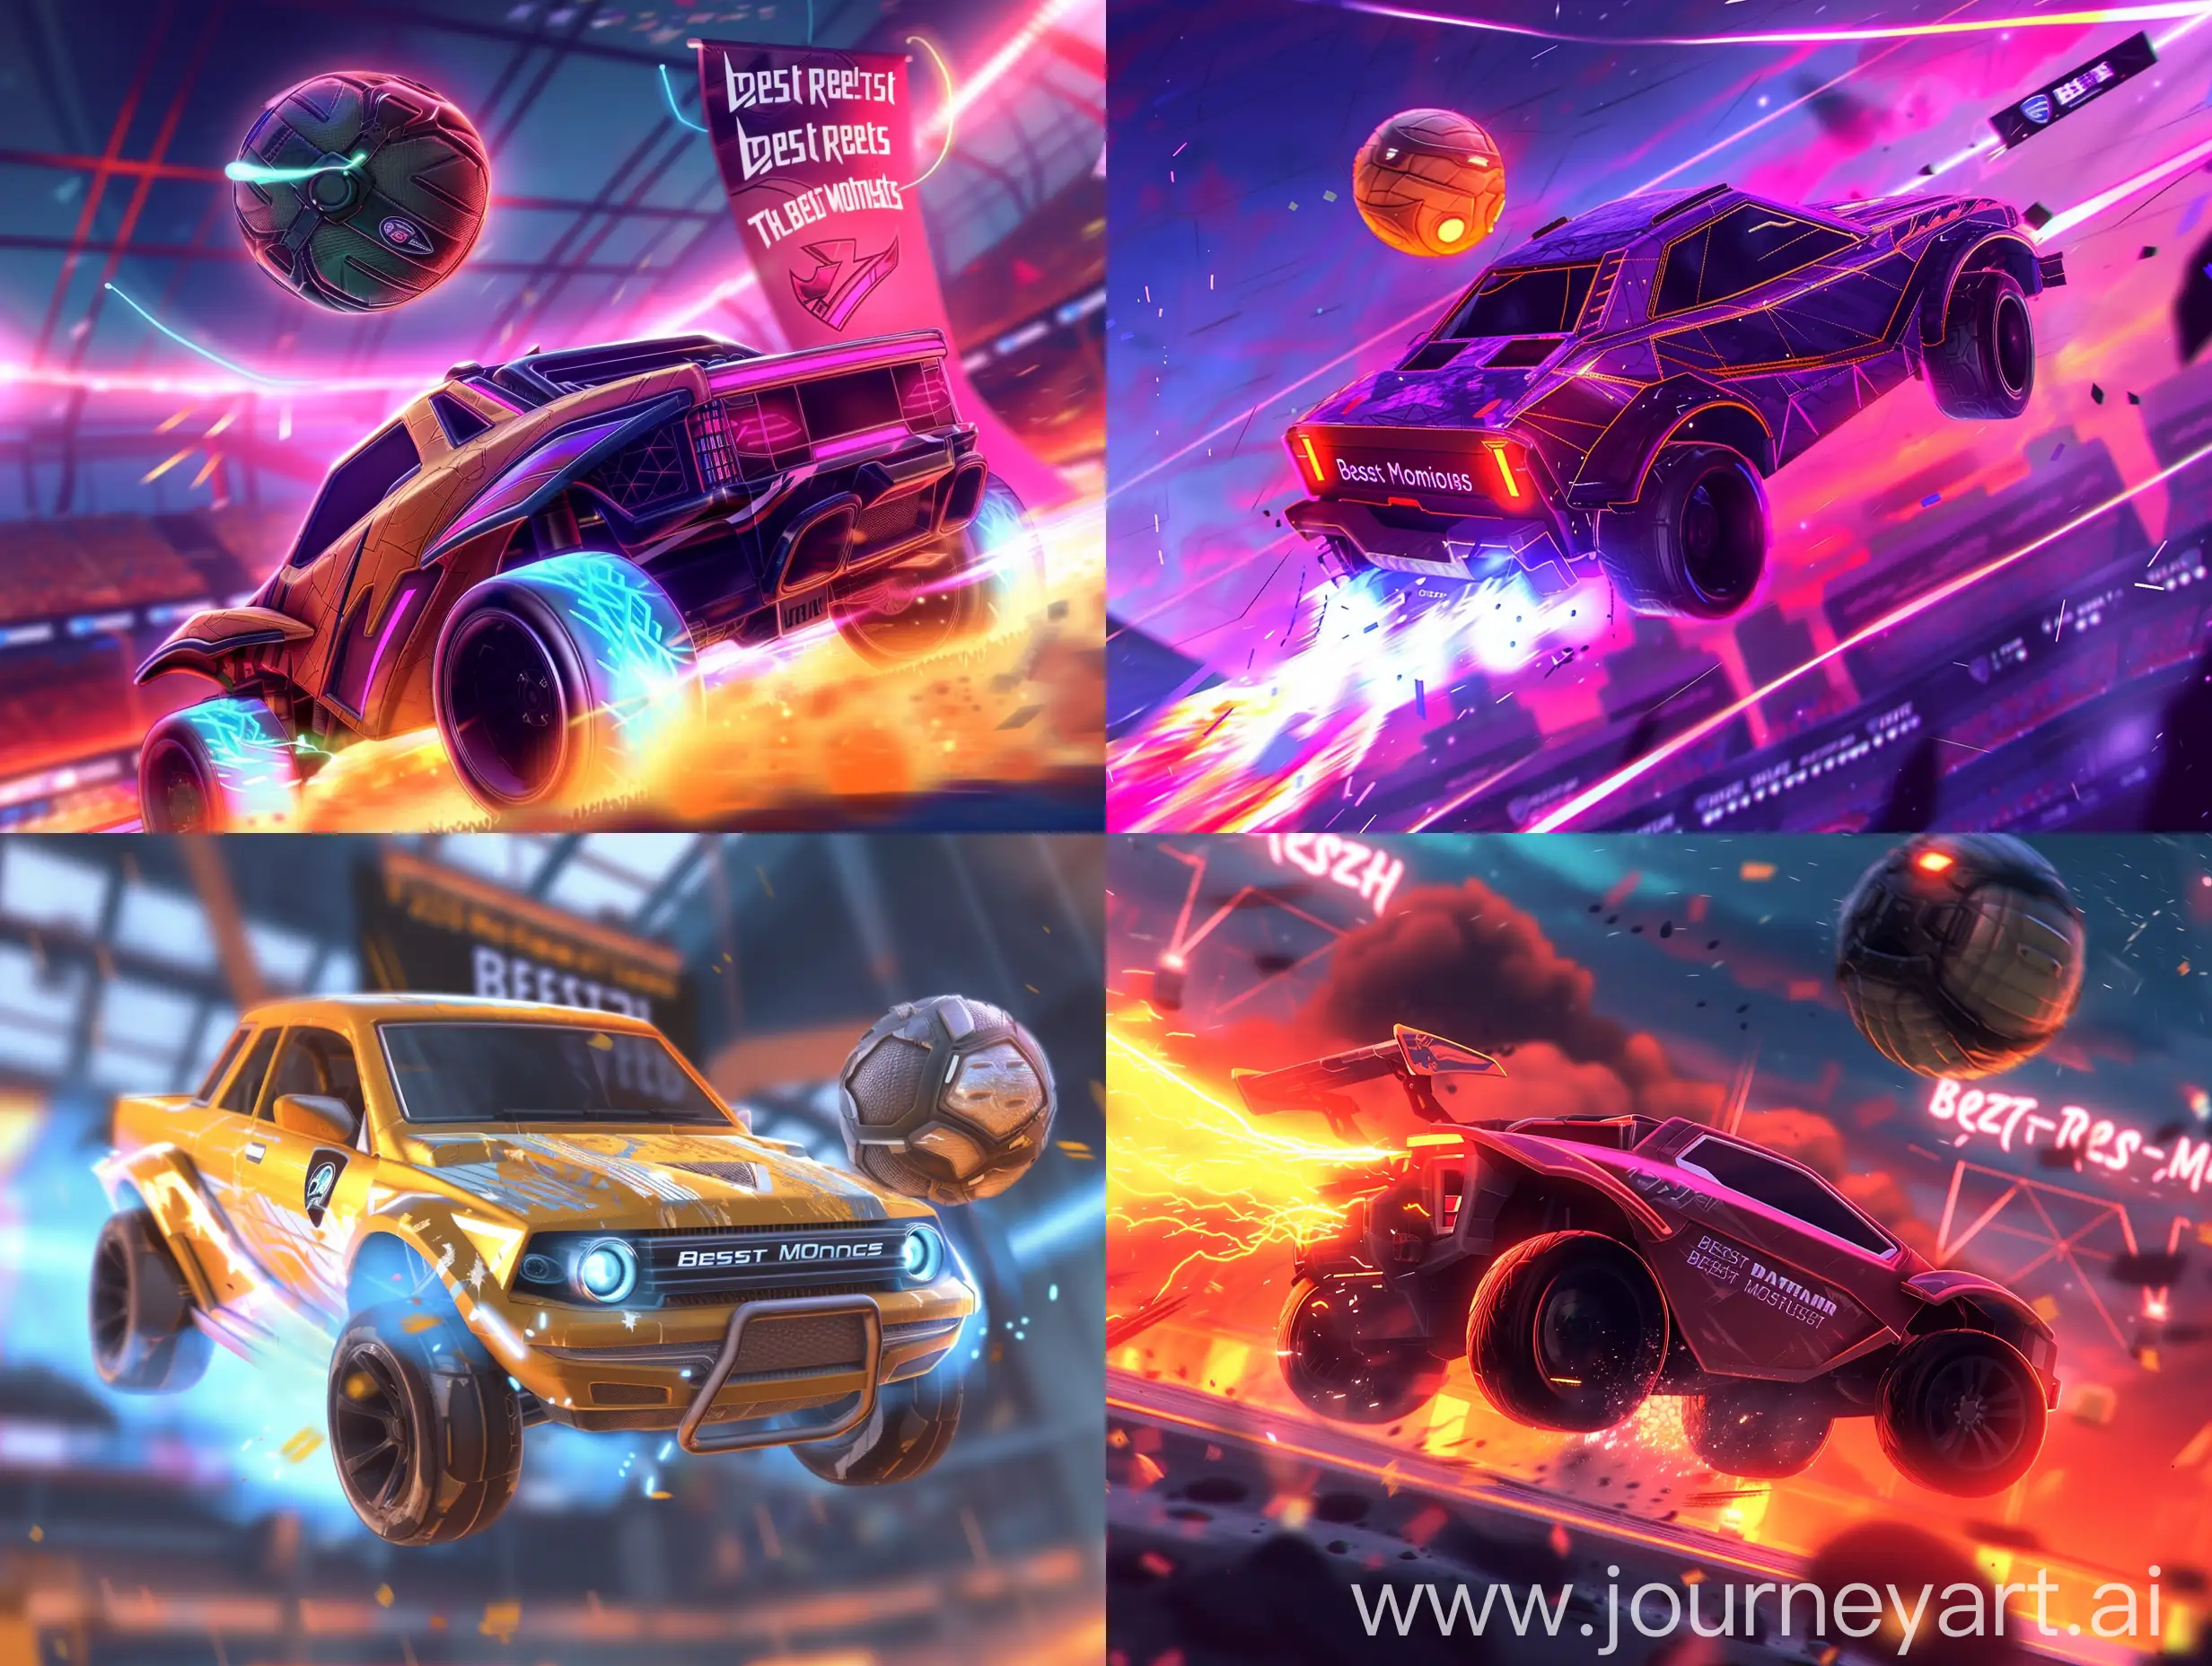 Make a banner for the event on the discord server for the Rocket League game. The event is called: the best replays. Imagine that the banner is made using 3D graphics, using shadows, glow, and the like. Choose the colors at your discretion. Also, do not forget to add the inscription: "beast moments", you can make it, for example, on a banner that will hang against the background of the car.
And the car itself can, as it were, fly after the ball.